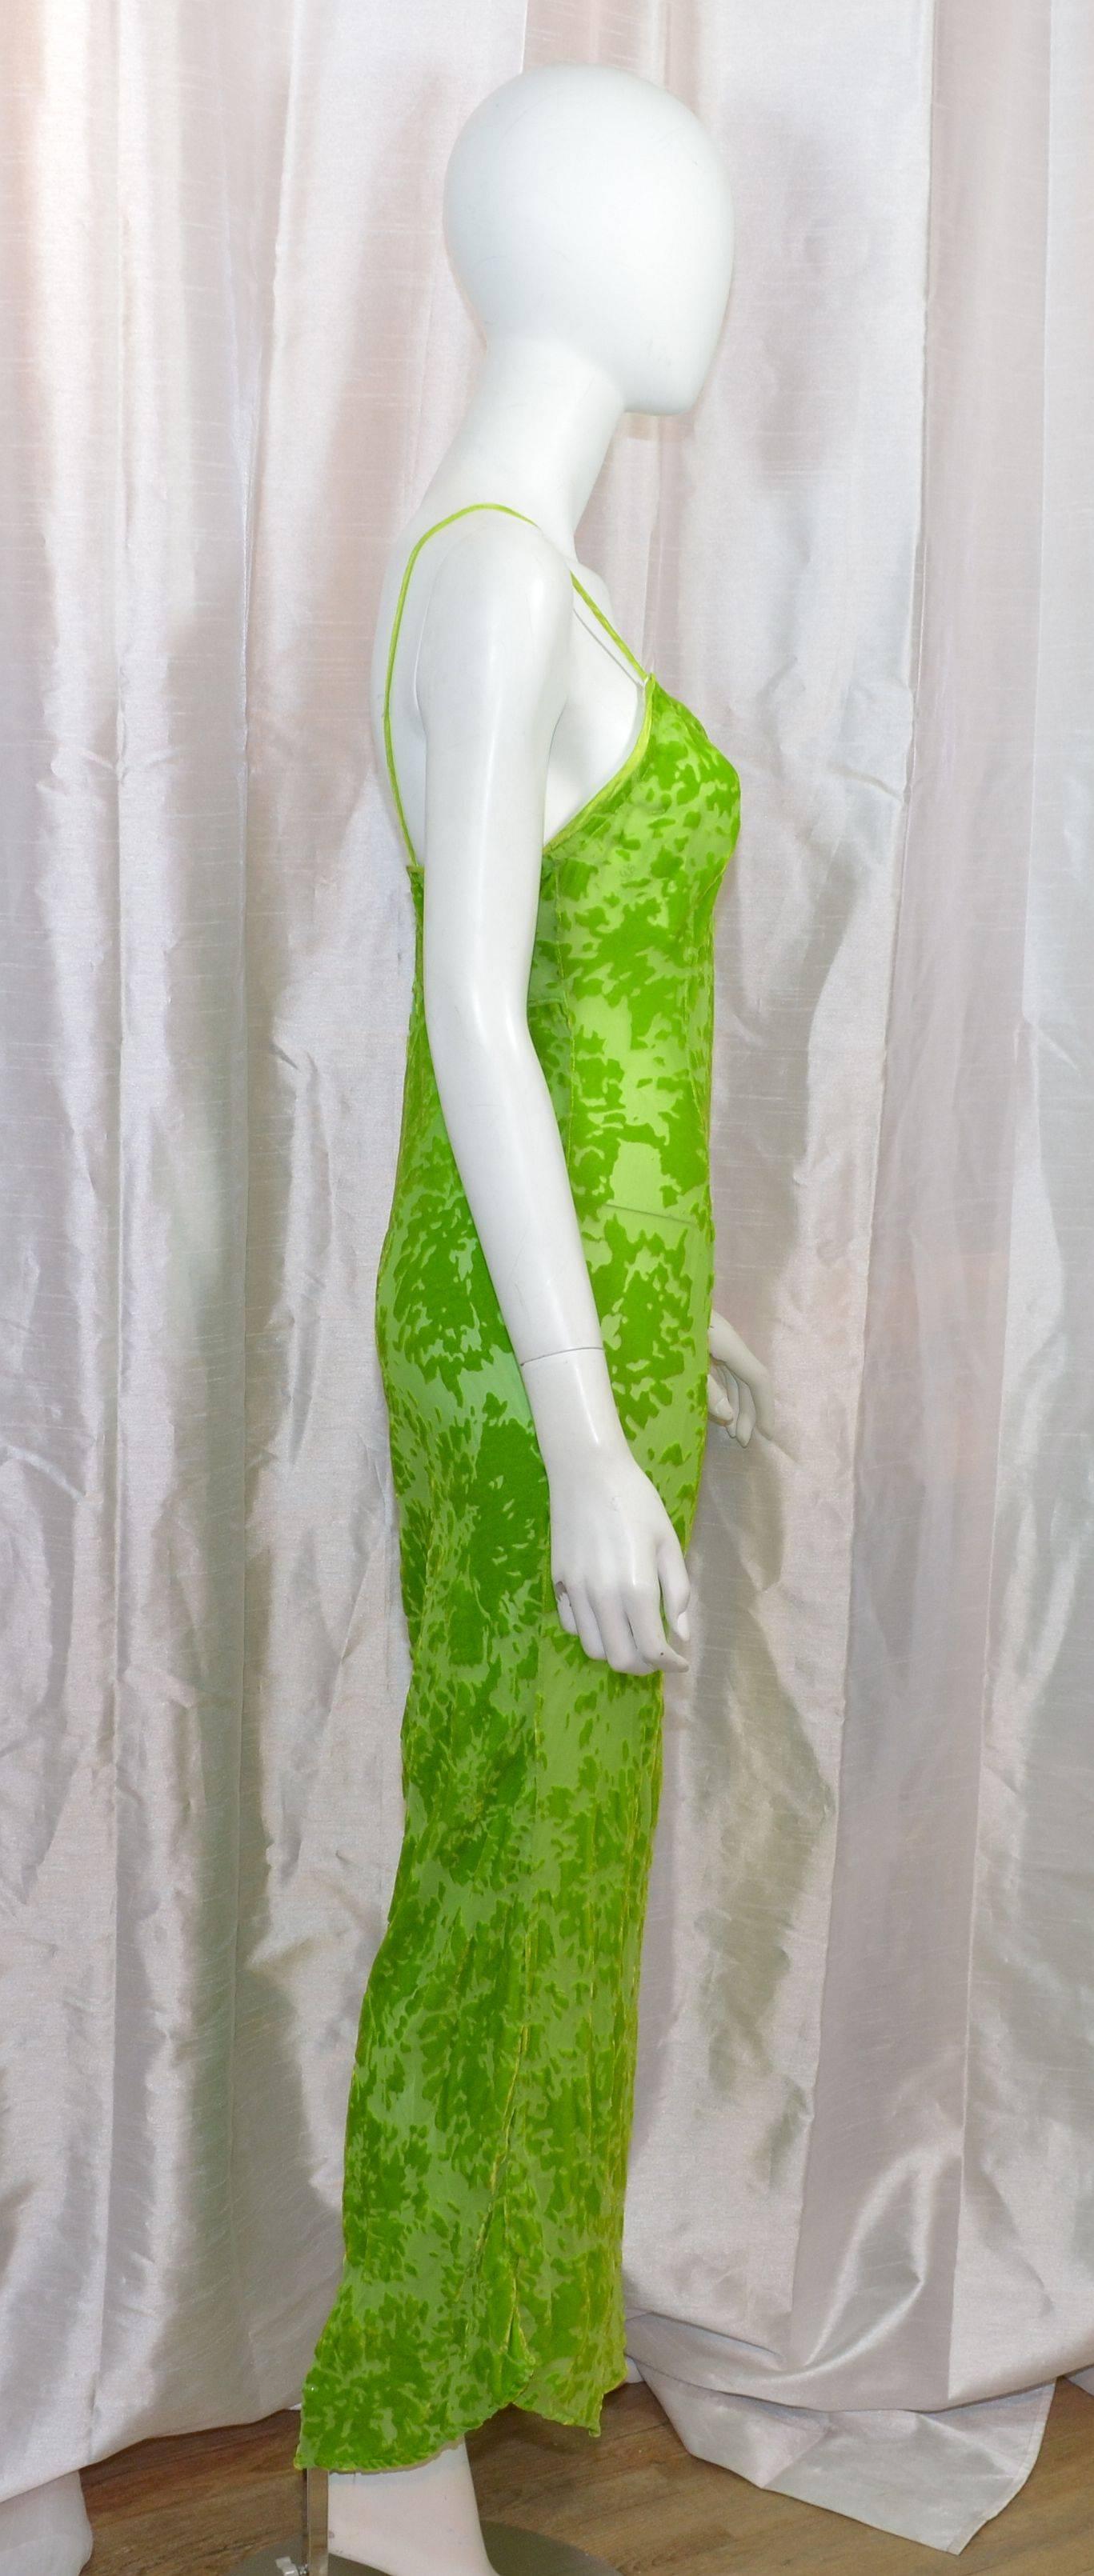 Voyage maxi slip dress featured in a lime green with cut velvet details. Bias cut fabric with a satin trim at the neckline, and satin shoulder straps. Dress is labeled 